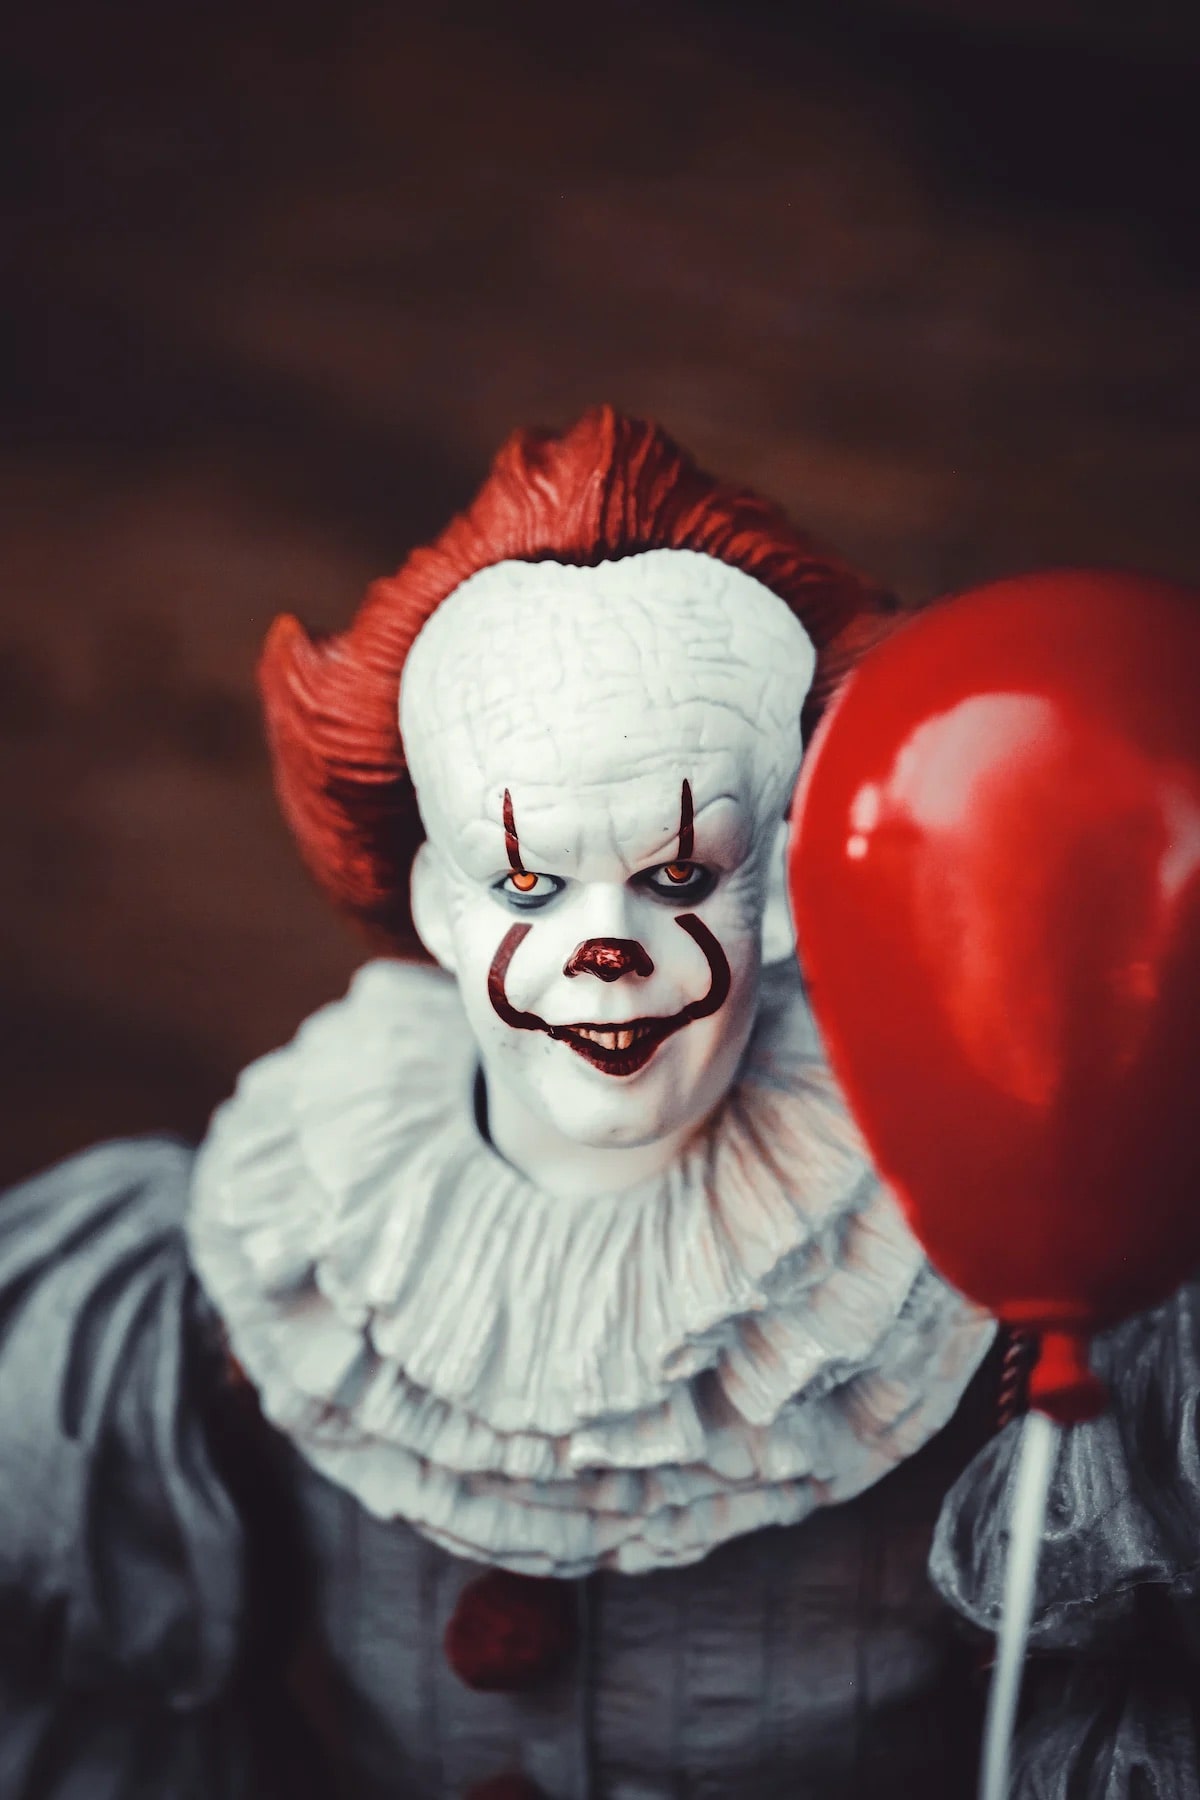 An image of Pennywise from the horror movie IT.